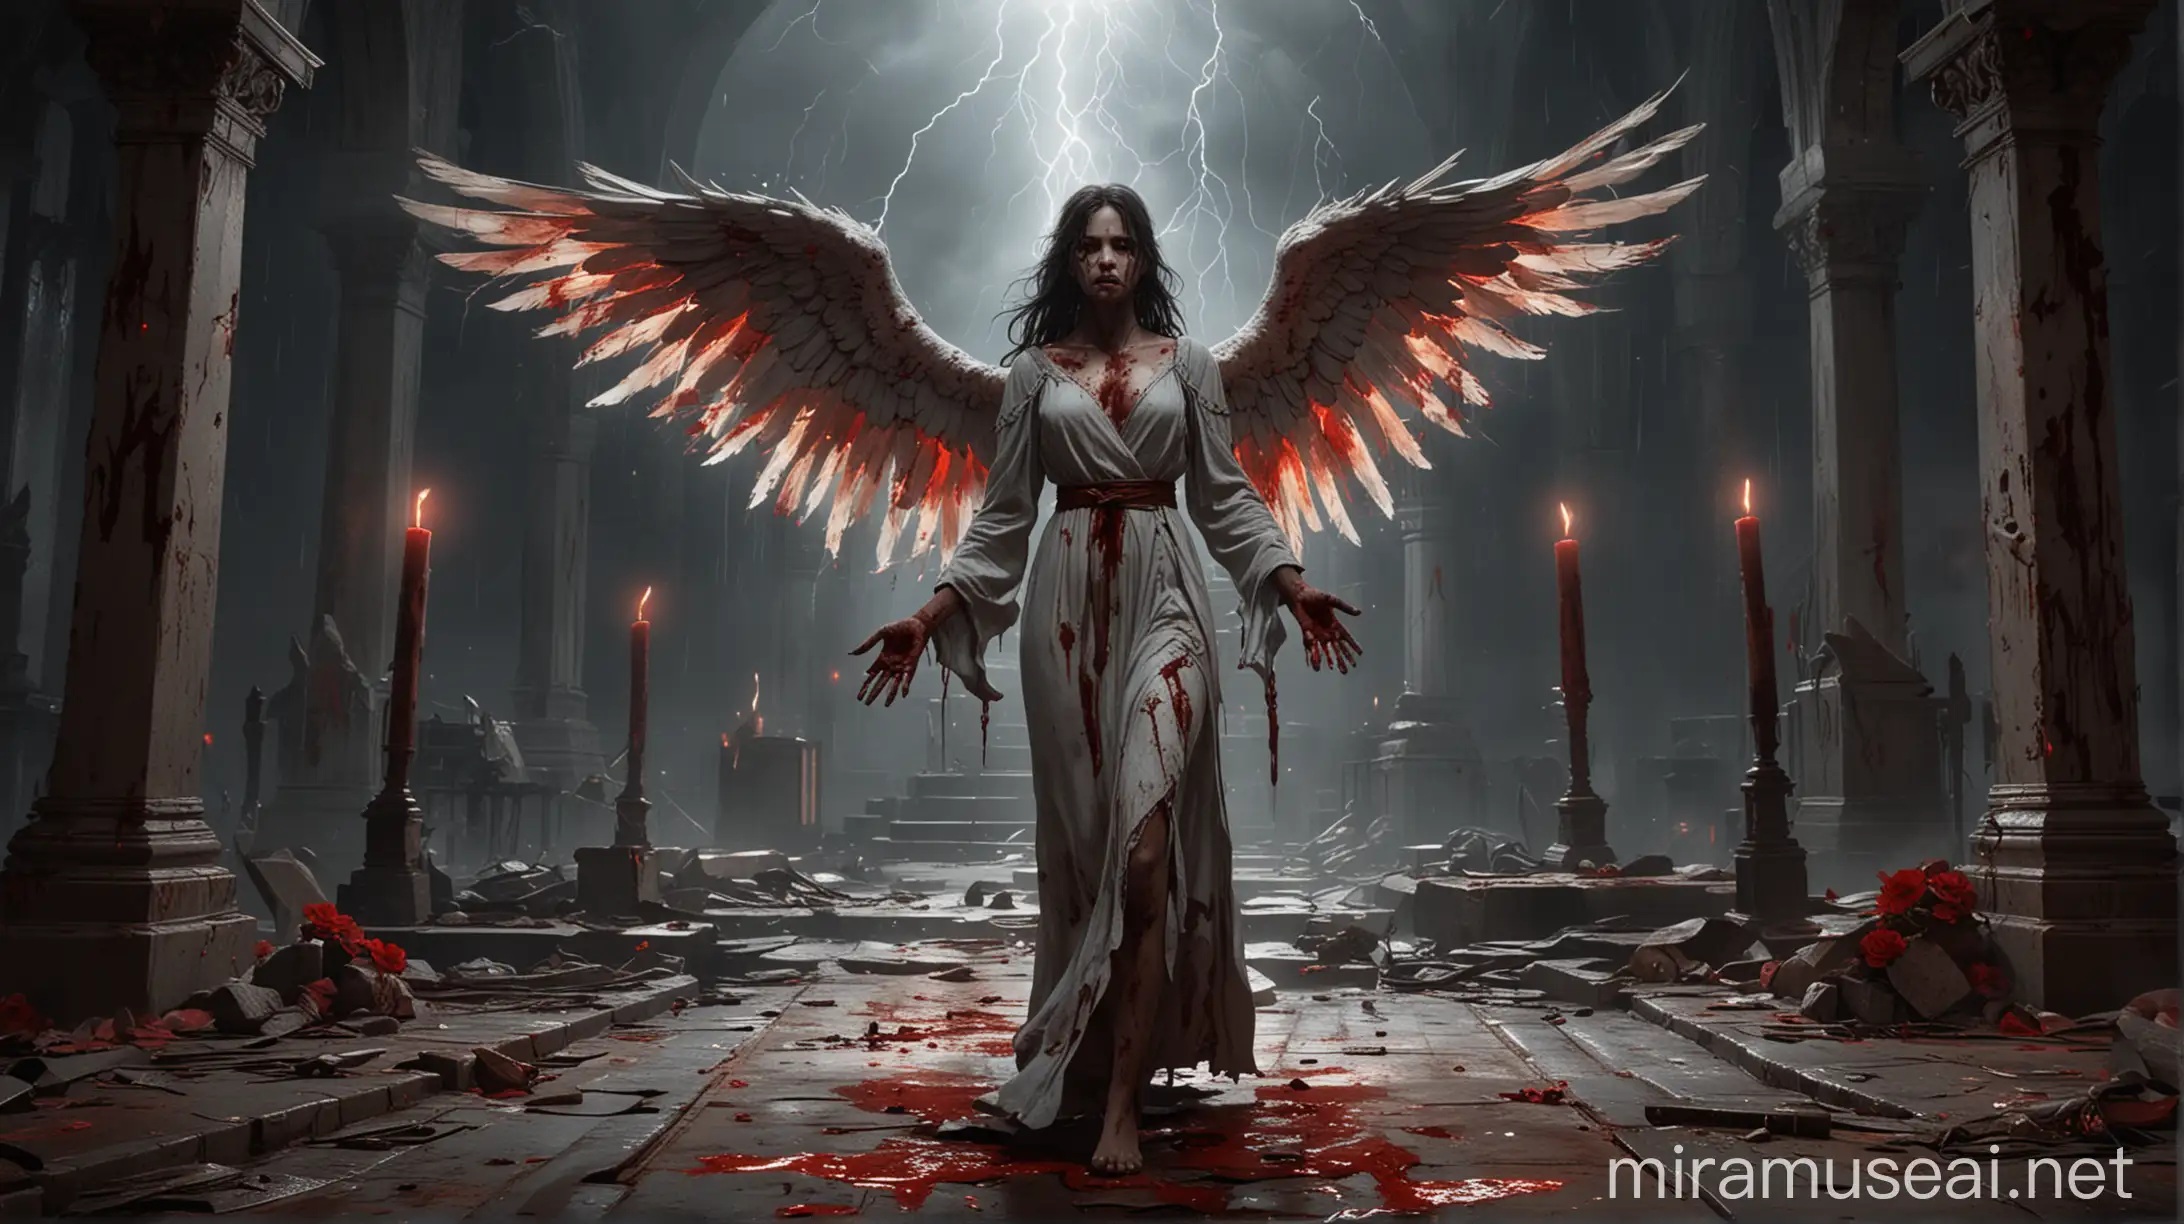 Angel Girl with Bloodied Hands Approaches Stormy Altar with Bloody Lightning